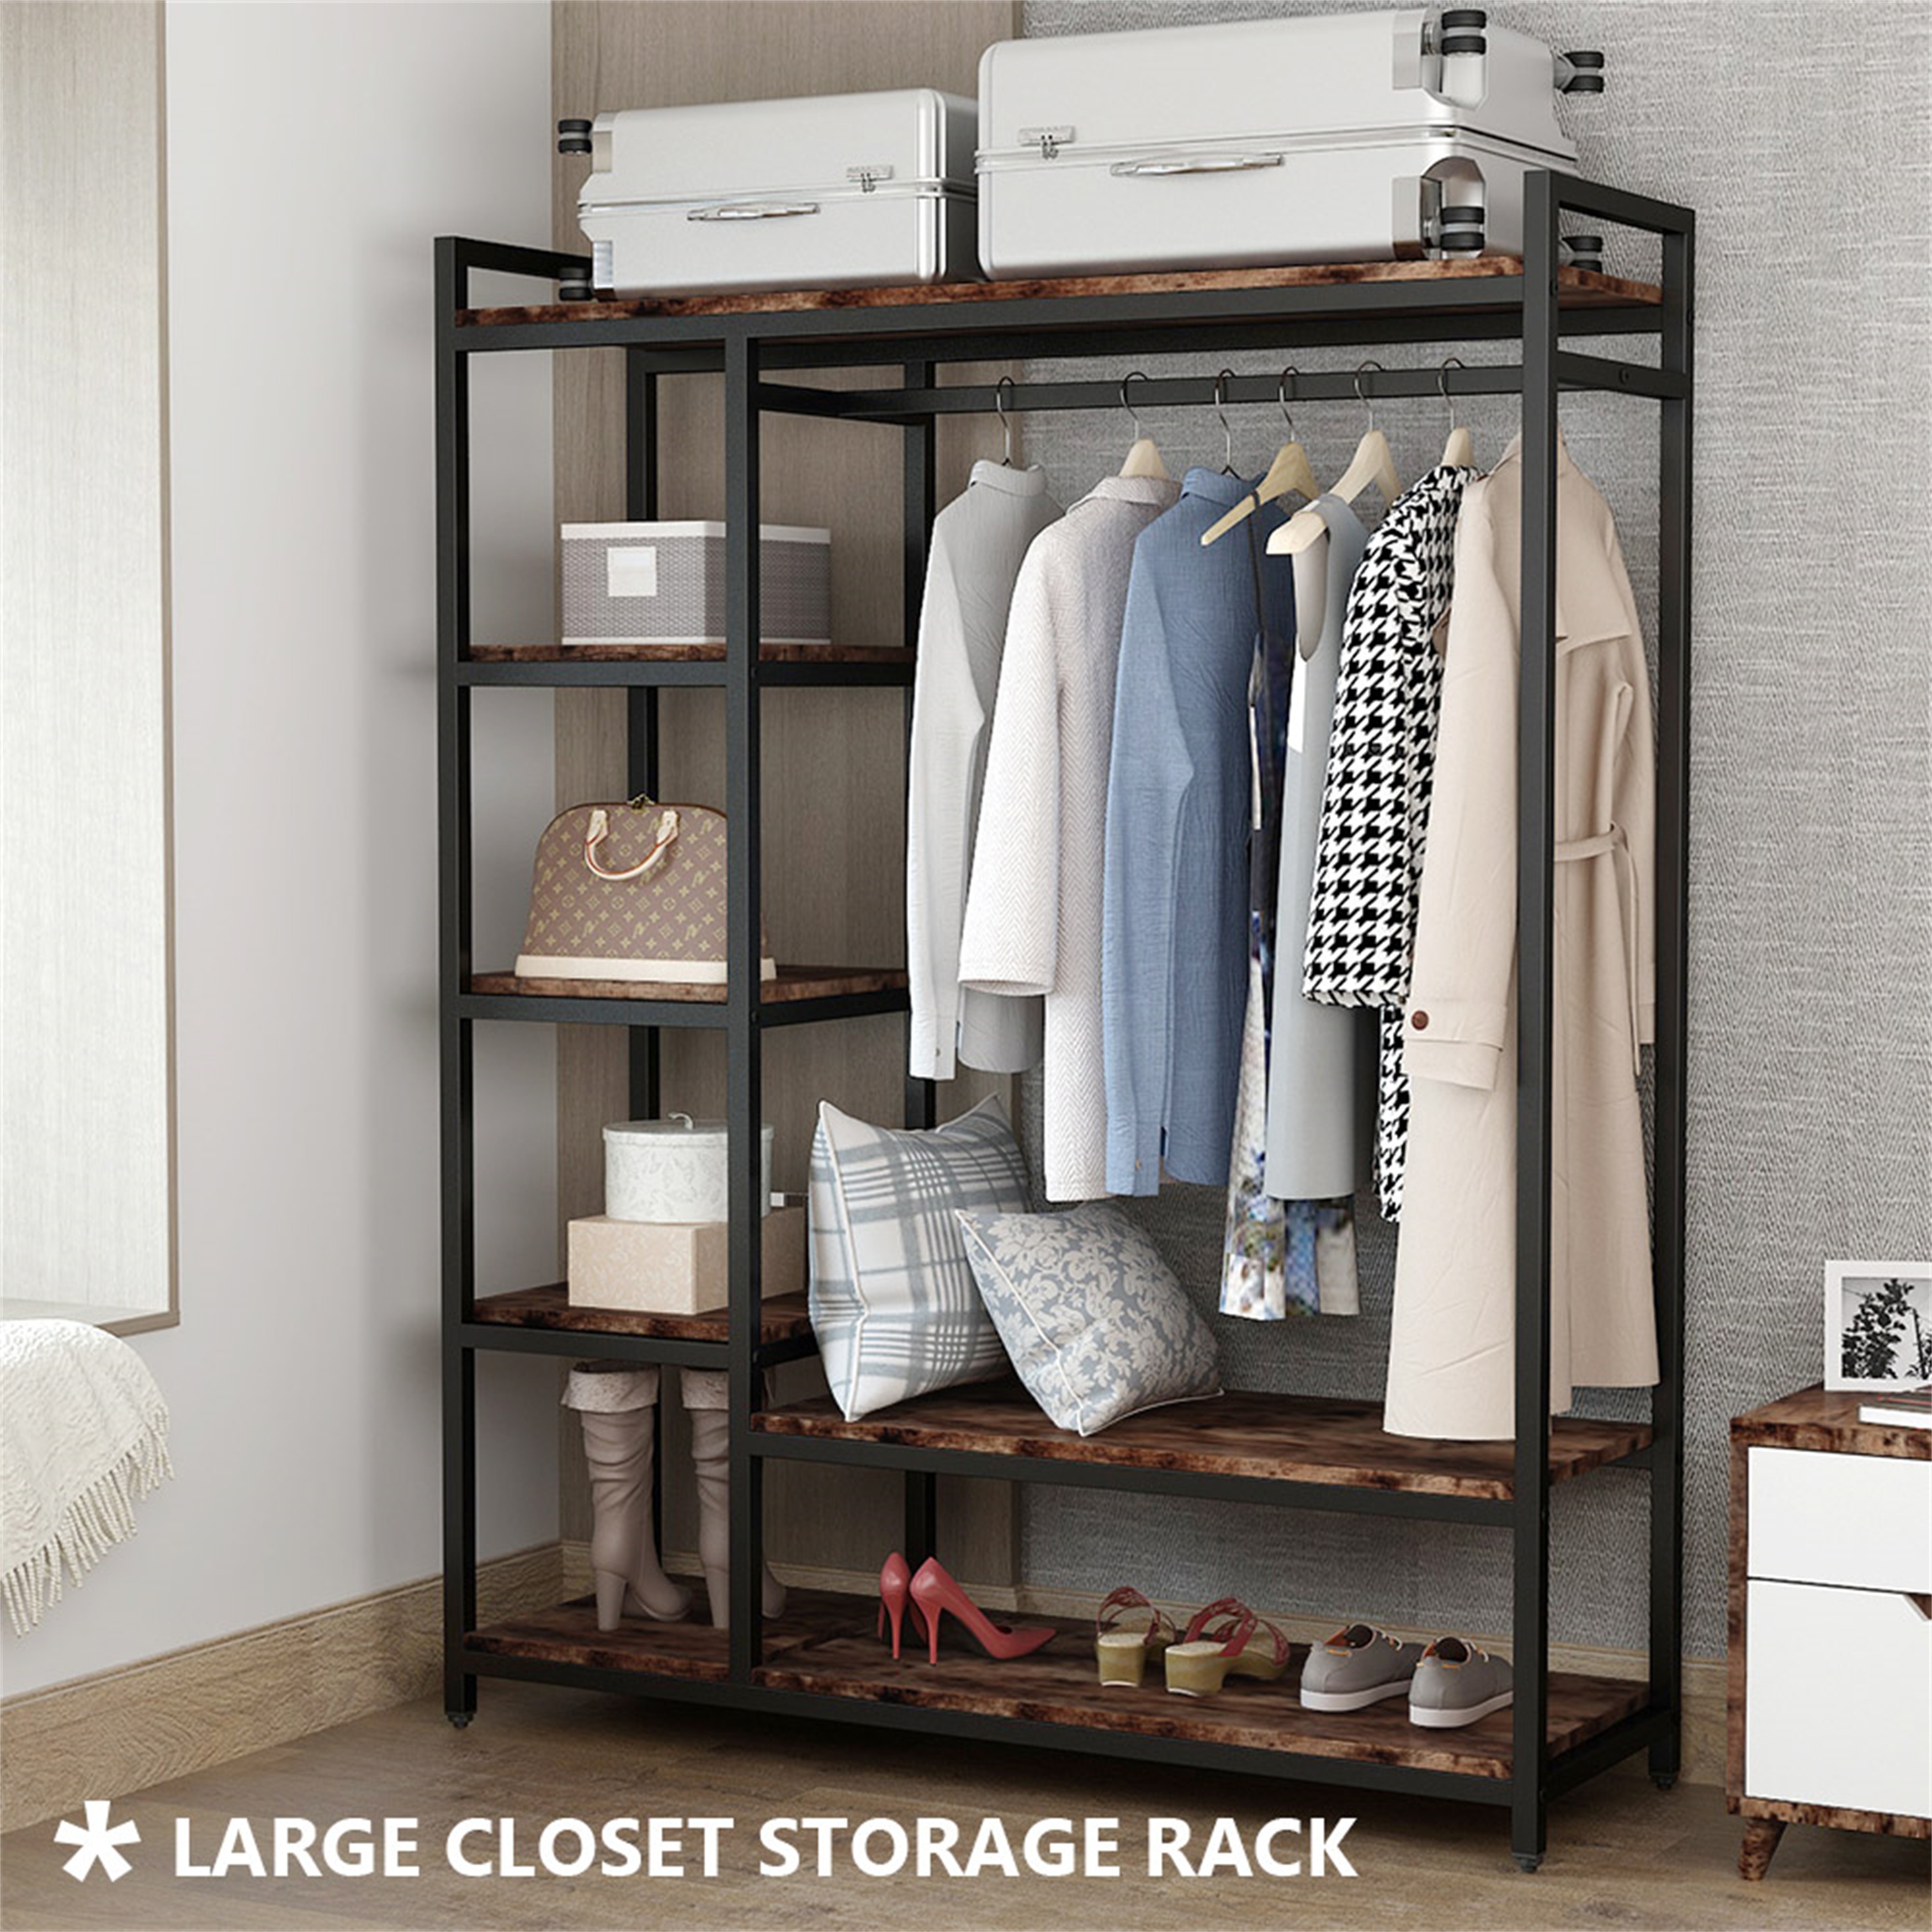 https://ak1.ostkcdn.com/images/products/is/images/direct/e8d11aff300dc1ebe168c295e3f11ea7a0cfda22/Brown--Black-Wood-Industrial-Clothing-rack-with-shelves%2C-5-Tier-Clothes-Garment-Rack-Closet-Organizer-System-with-Hanging-Rod.jpg